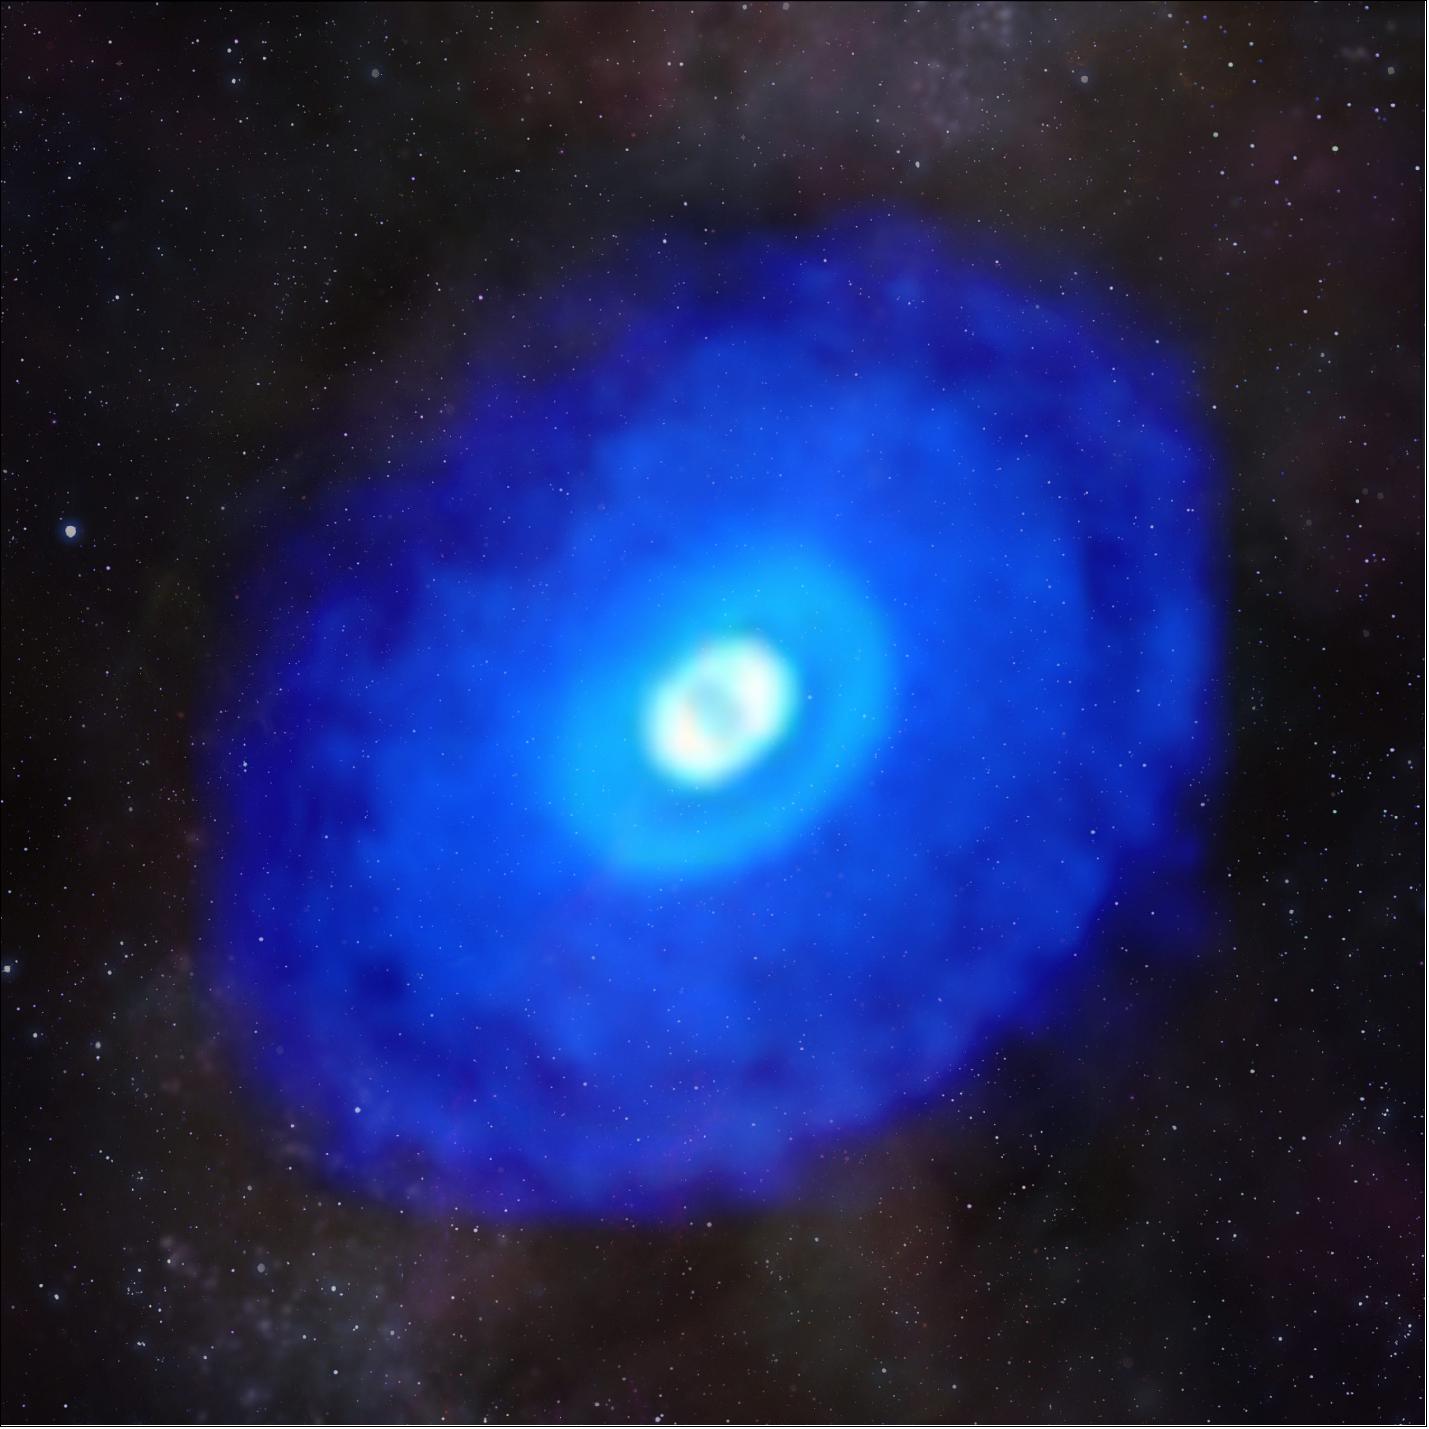 *Figure 16: This composite image of ALMA data from the young star HD 163296 shows hydrogen cyanide e*mission laid over a starfield. The MAPS project zoomed in on hydrogen cyanide and other organic and inorganic compounds in planet-forming disks to gain a better understanding of the compositions of young planets and how the compositions link to where planets form in a protoplanetary disk [image credit: ALMA (ESO/NAOJ/NRAO)/D. Berry (NRAO), K. Öberg et al. (MAPS)]